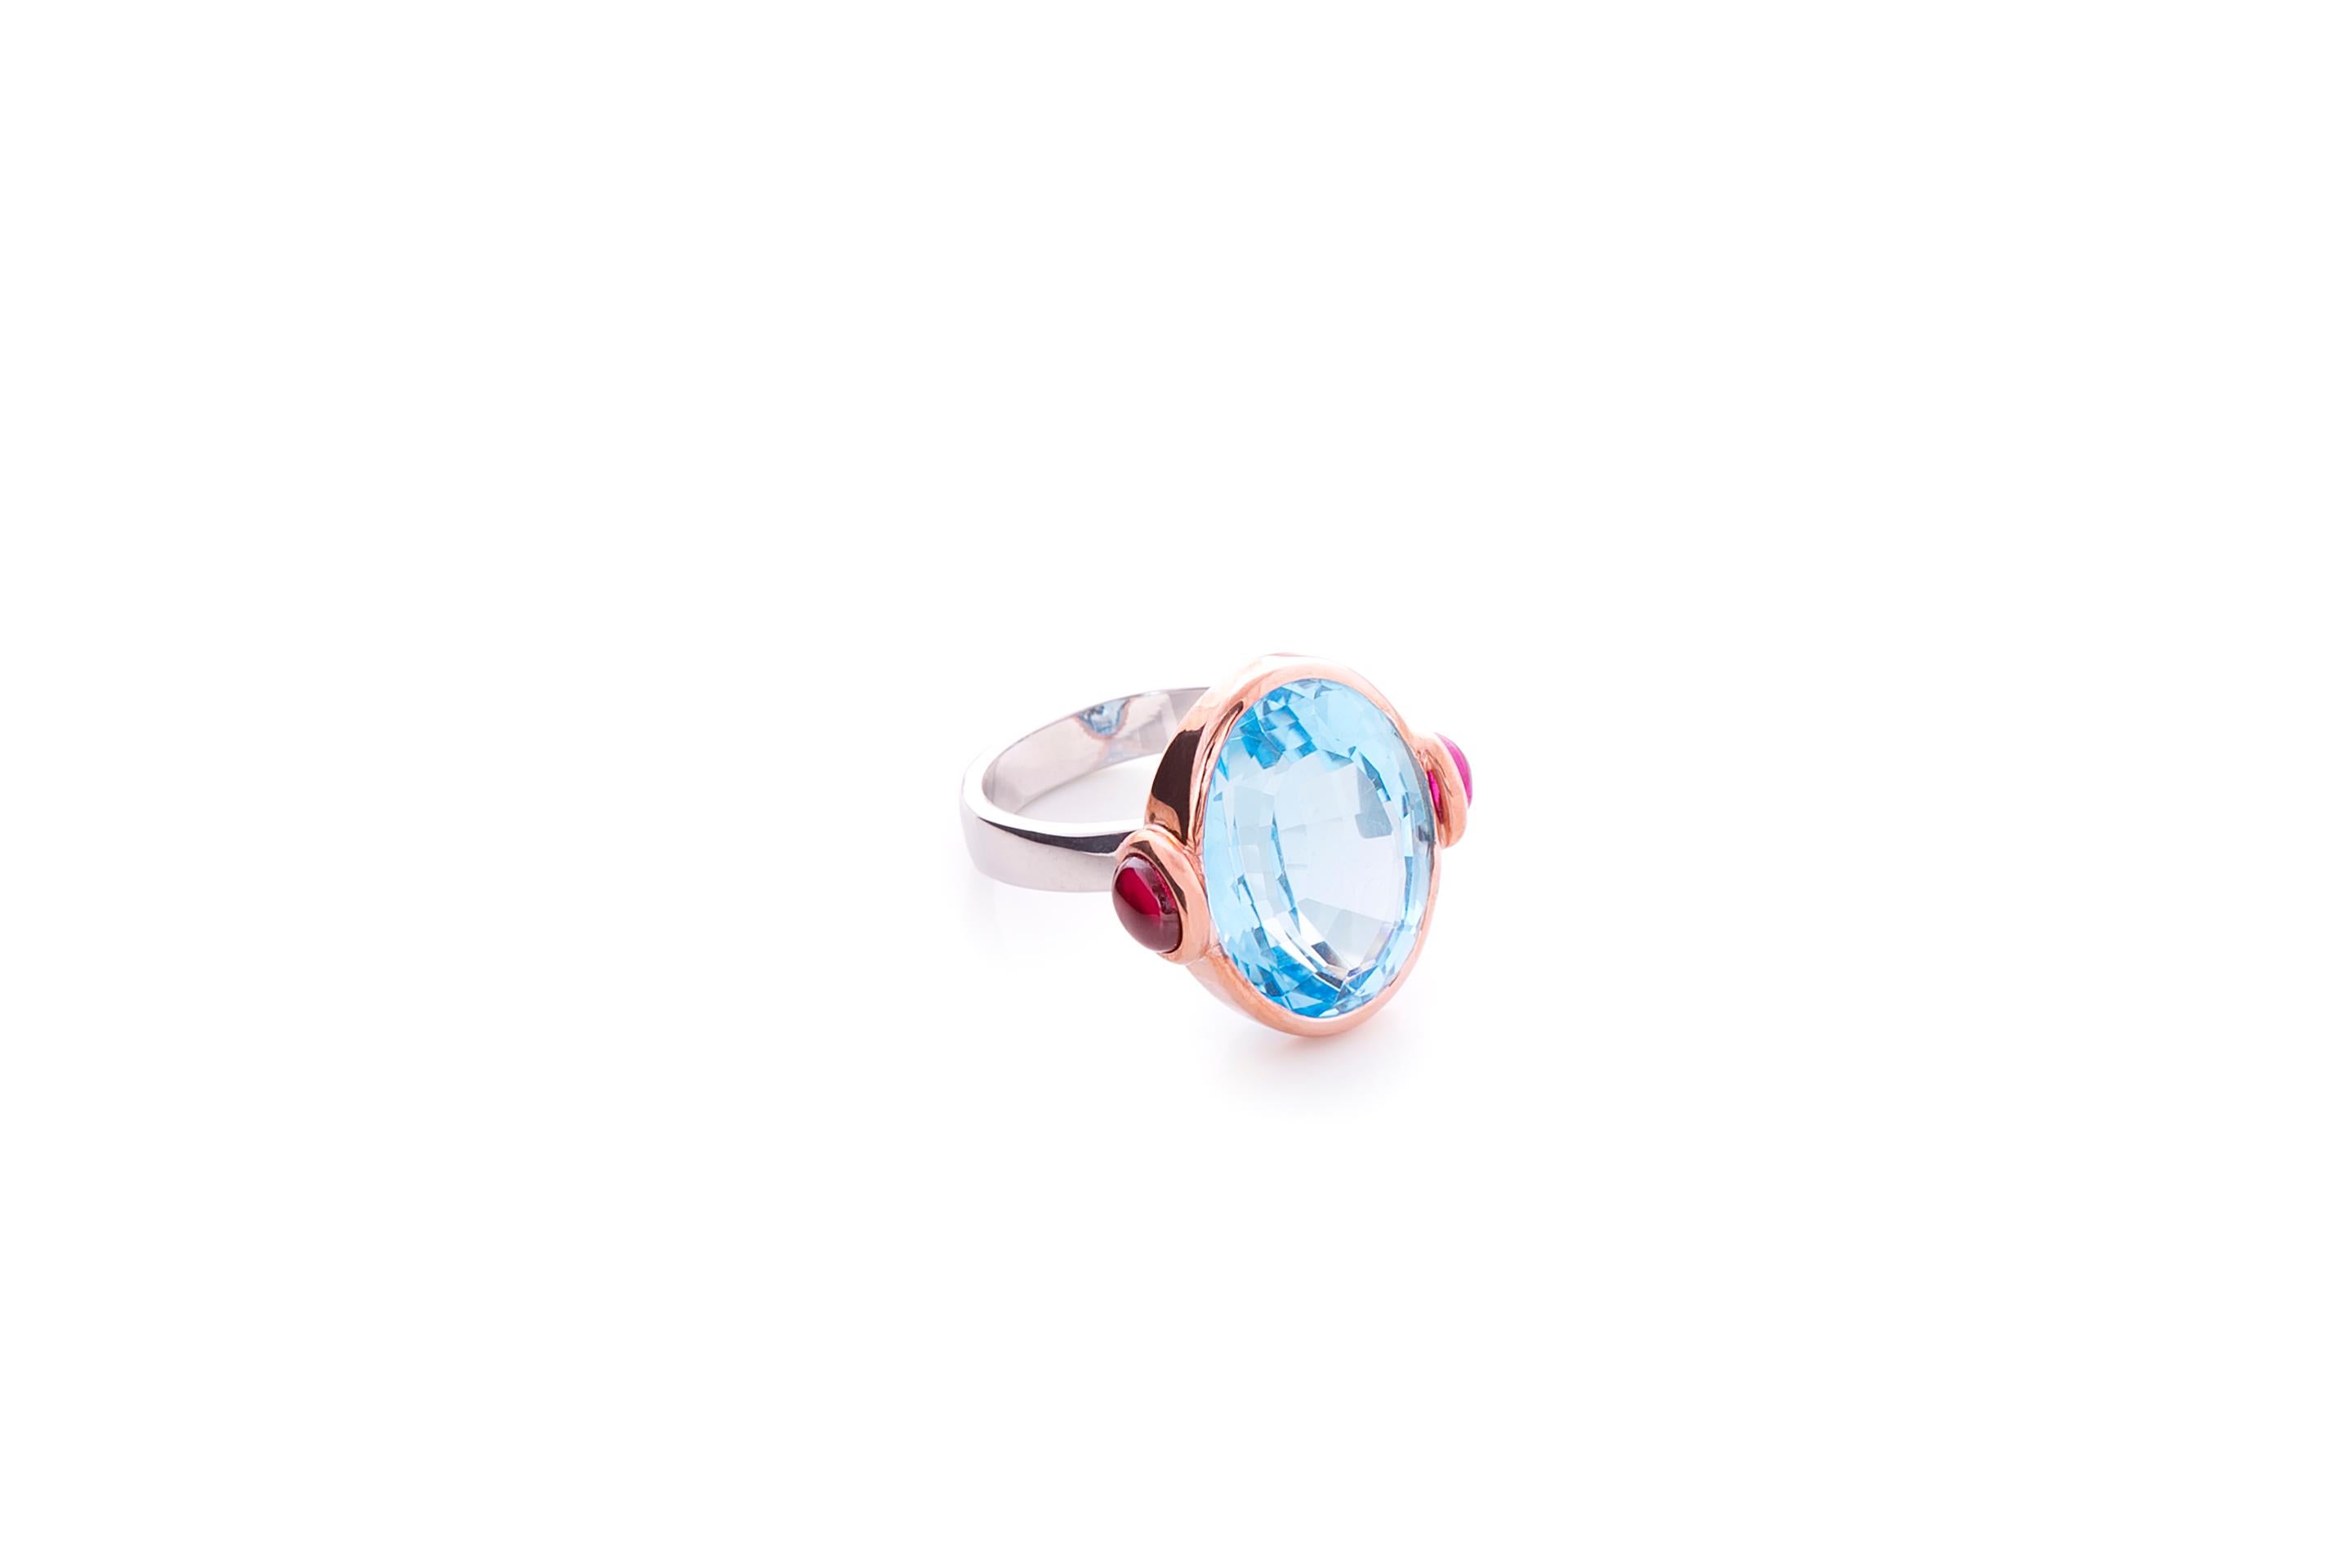 Deco Style 18 Karat White Gold Topaz Rubelite Cabochon Blue Candy Cocktail Ring
This beautiful Blue Candy Cocktail ring is finely handcrafted by expert artisans in 18 karats white gold and enriched with a beautiful light blue topaz stone and two